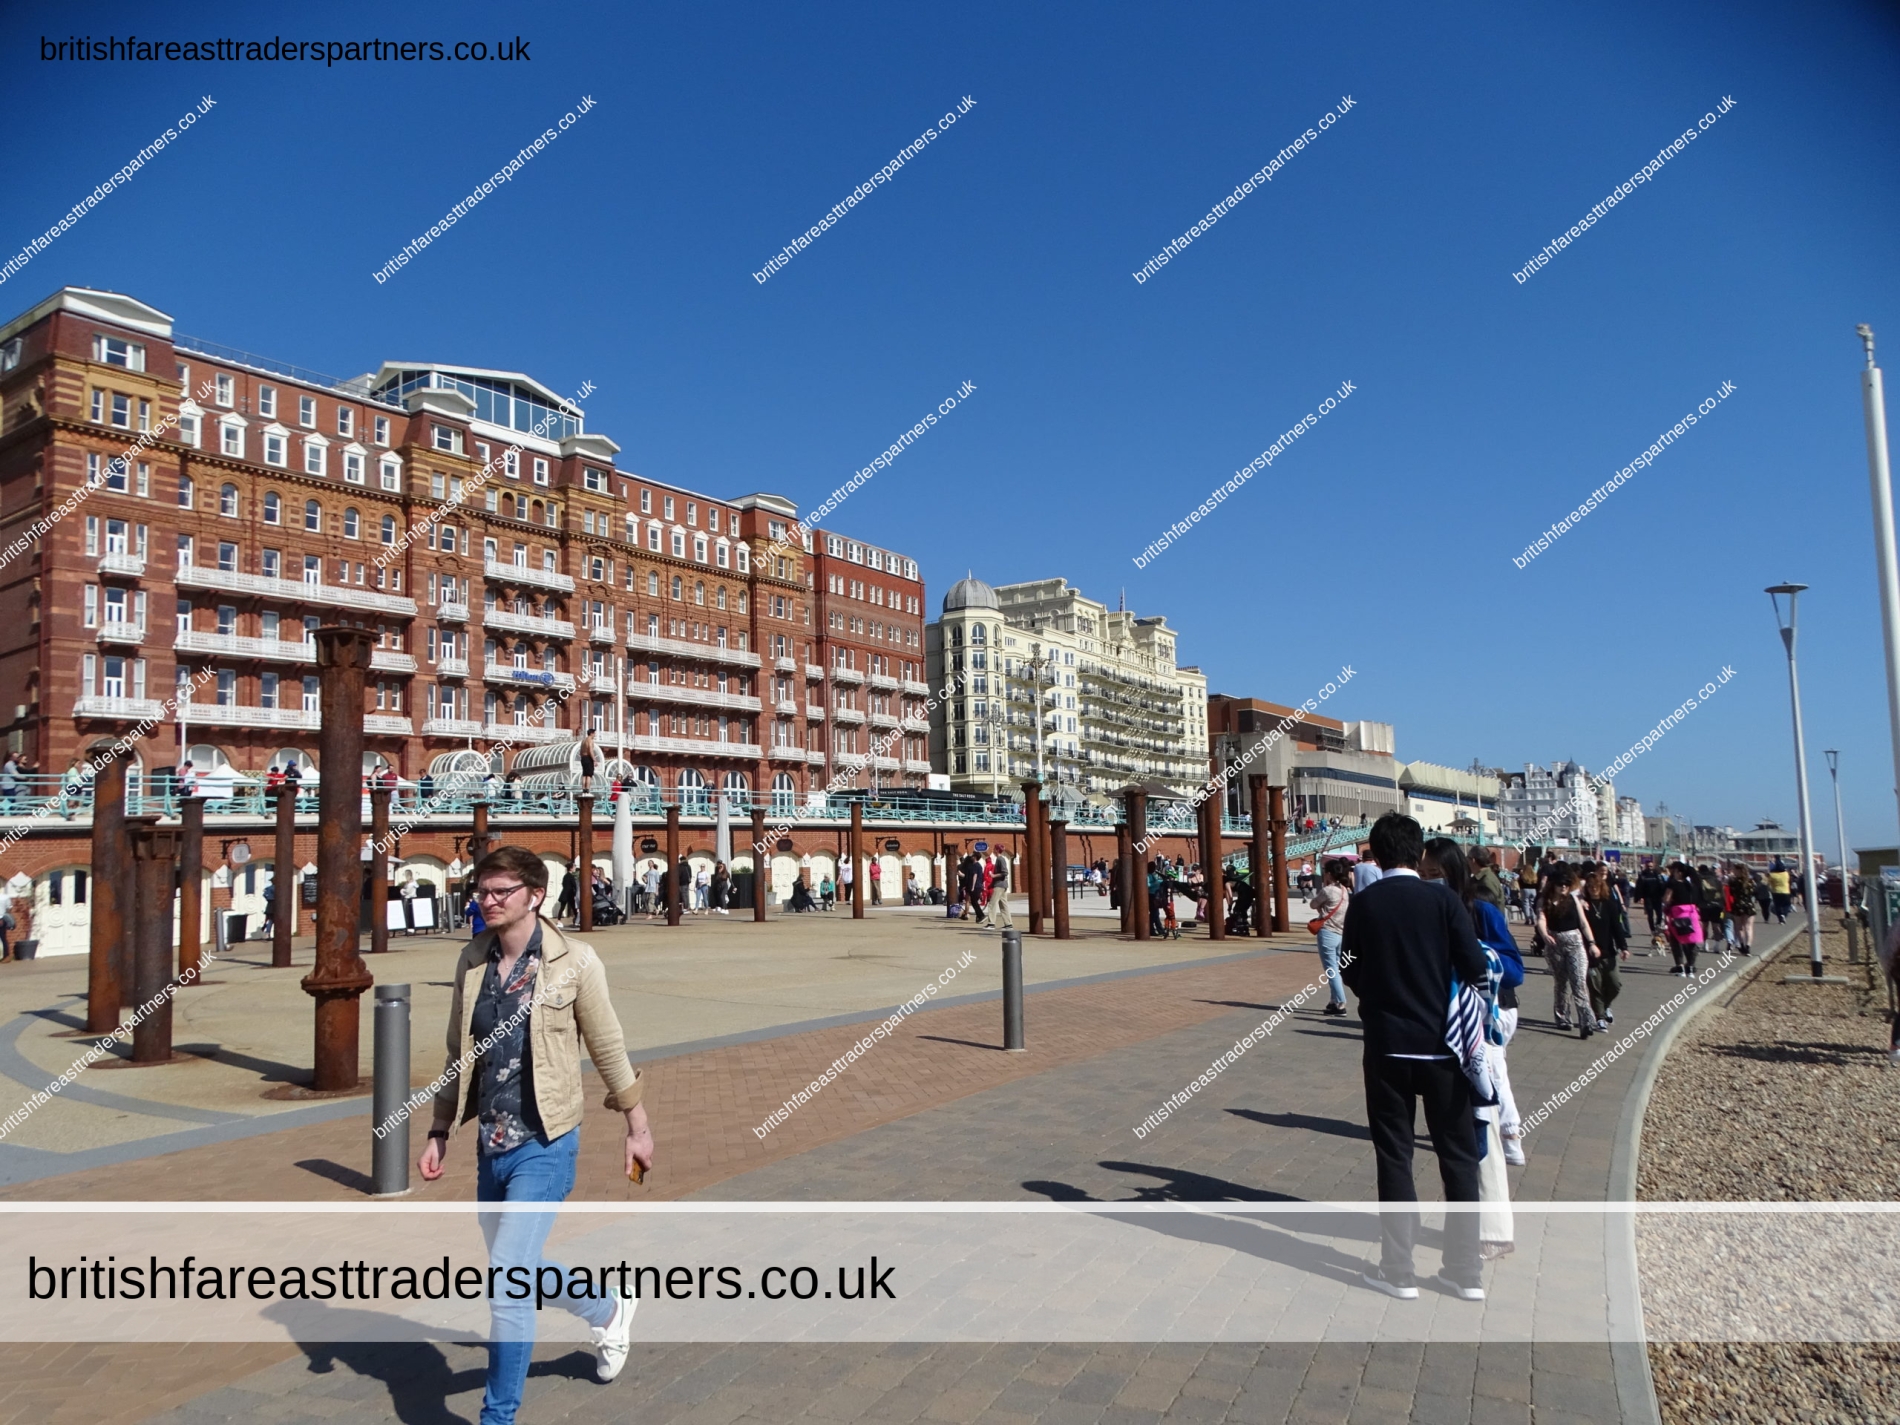 ANOTHER SUNNY DAY IN SPRINGTIME: A LOVELY WALK IN BRIGHTON BEACH AND SEAFRONT, ENGLAND